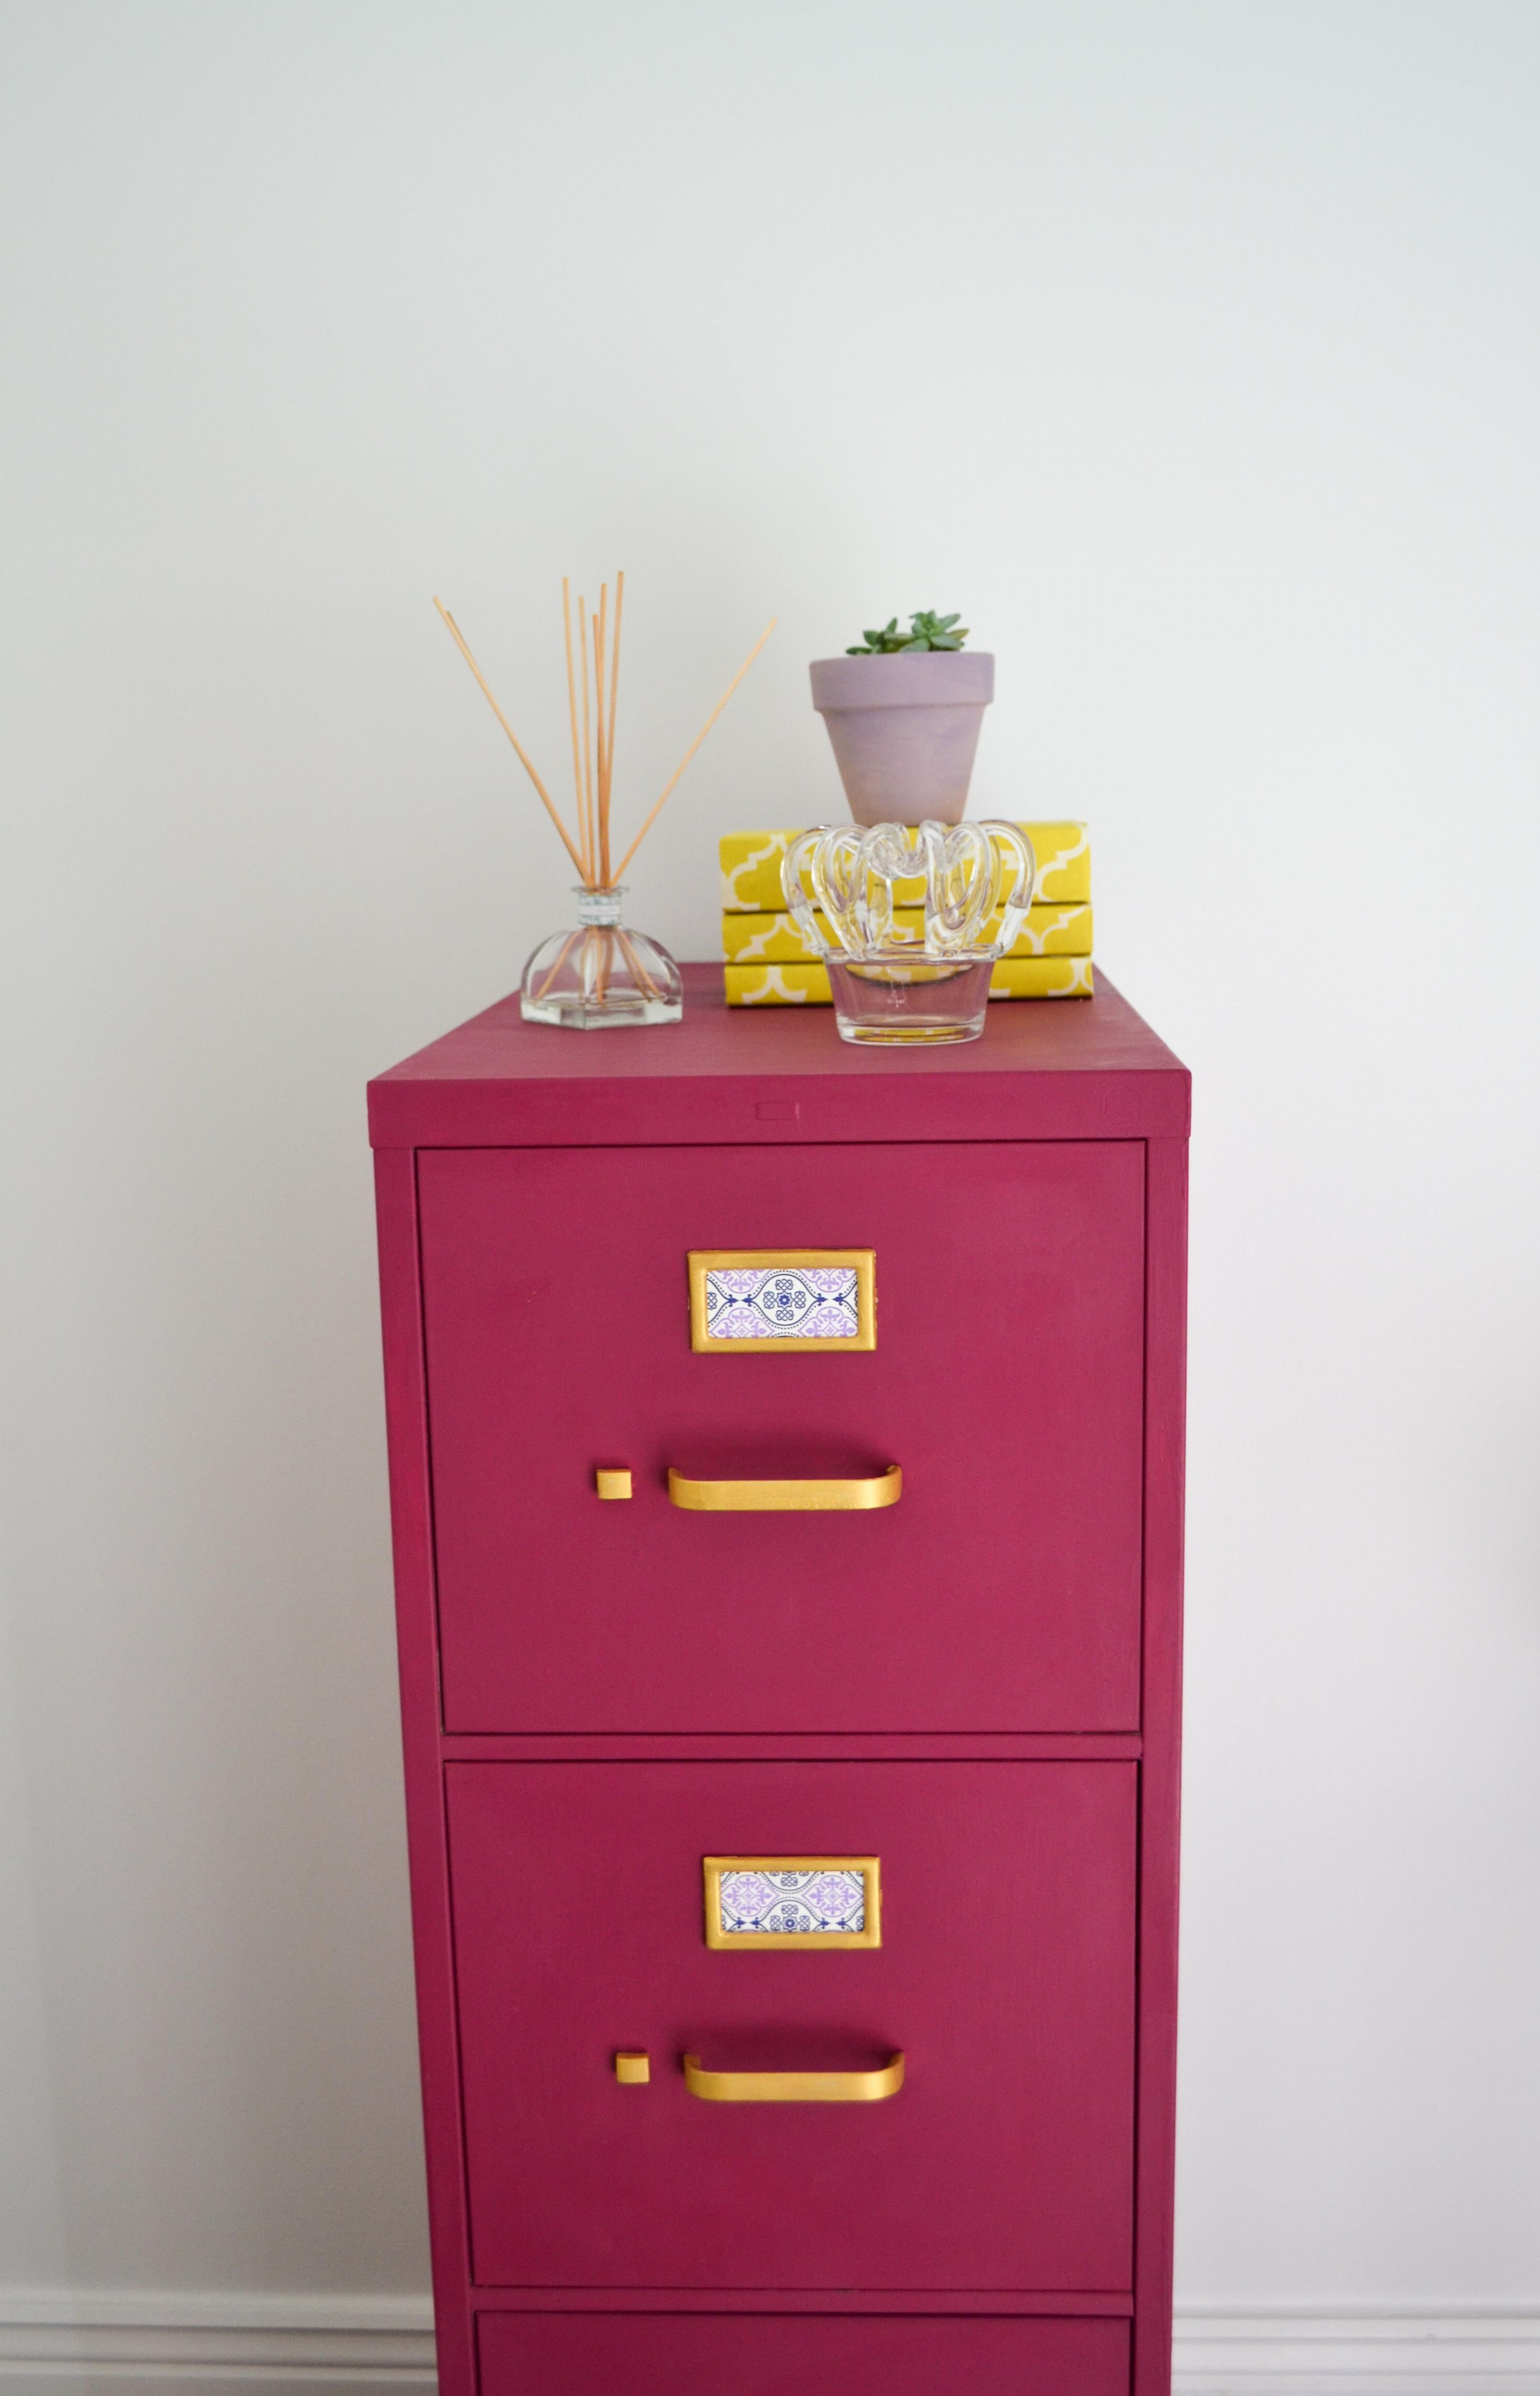 Custom Mix Of Chalk Paint® By Annie Sloan On Metal File Cabinet ..